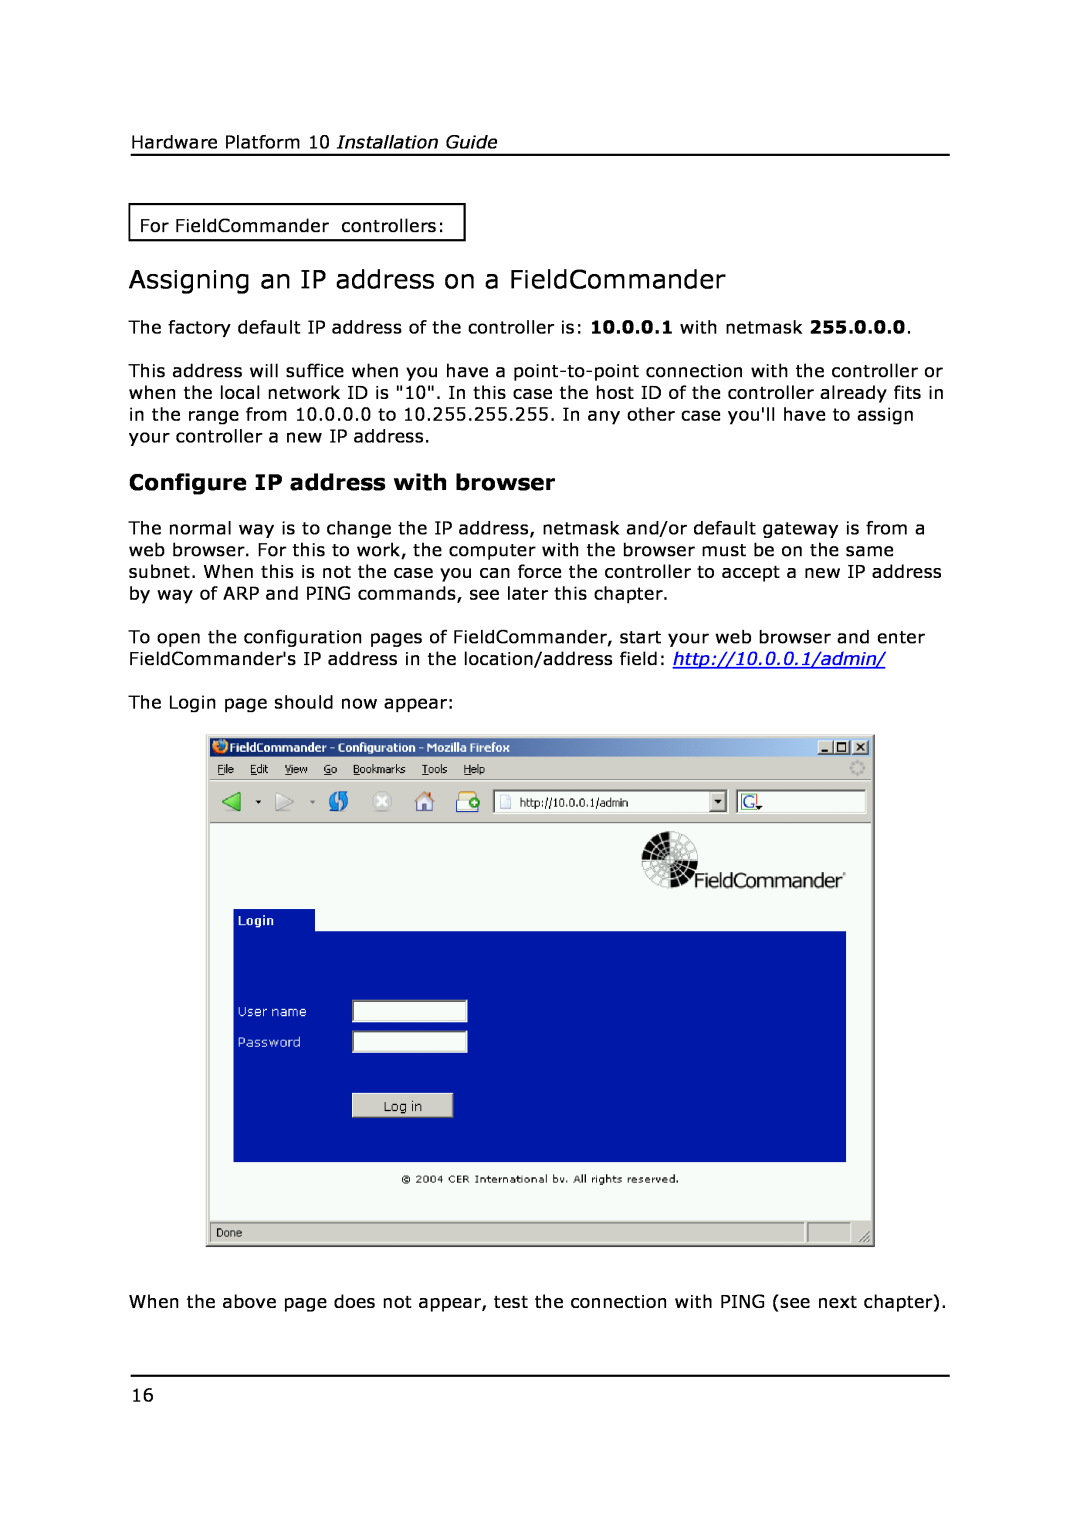 Field Controls 10 manual Assigning an IP address on a FieldCommander, Configure IP address with browser 